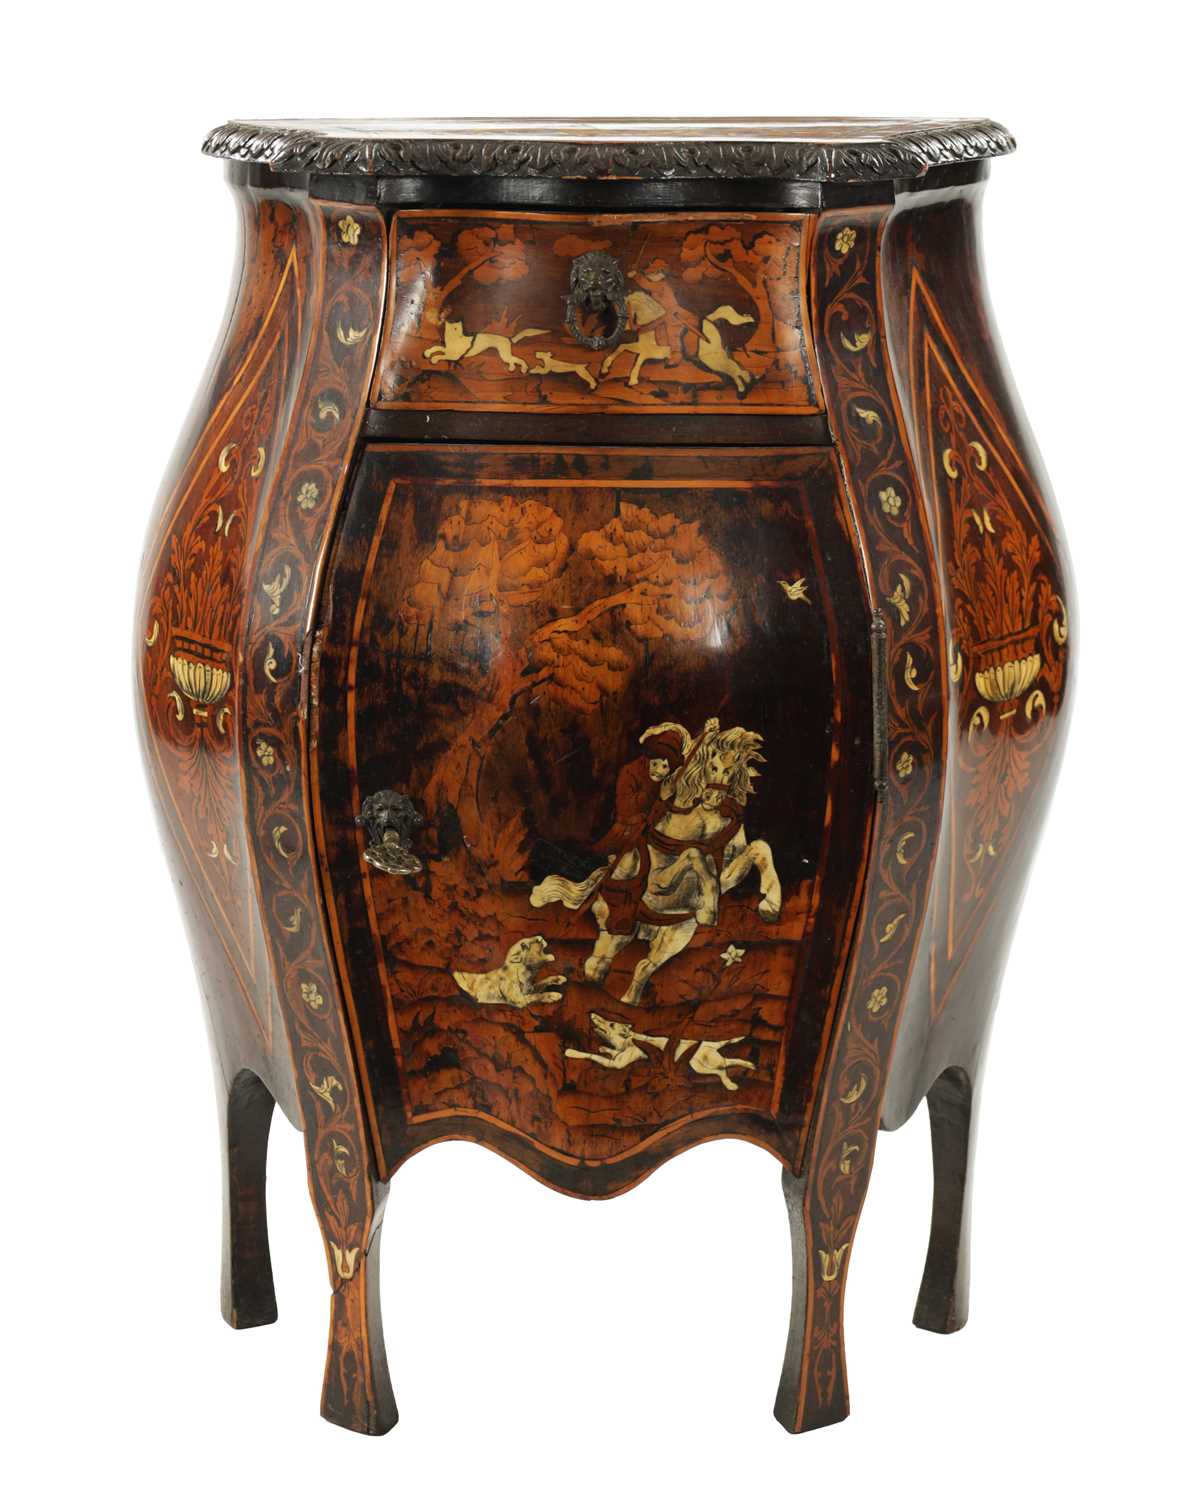 AN EARLY 18TH CENTURY ITALIAN MARQUETRY AND BONE INLAID COMMODE OF SMALL SIZE